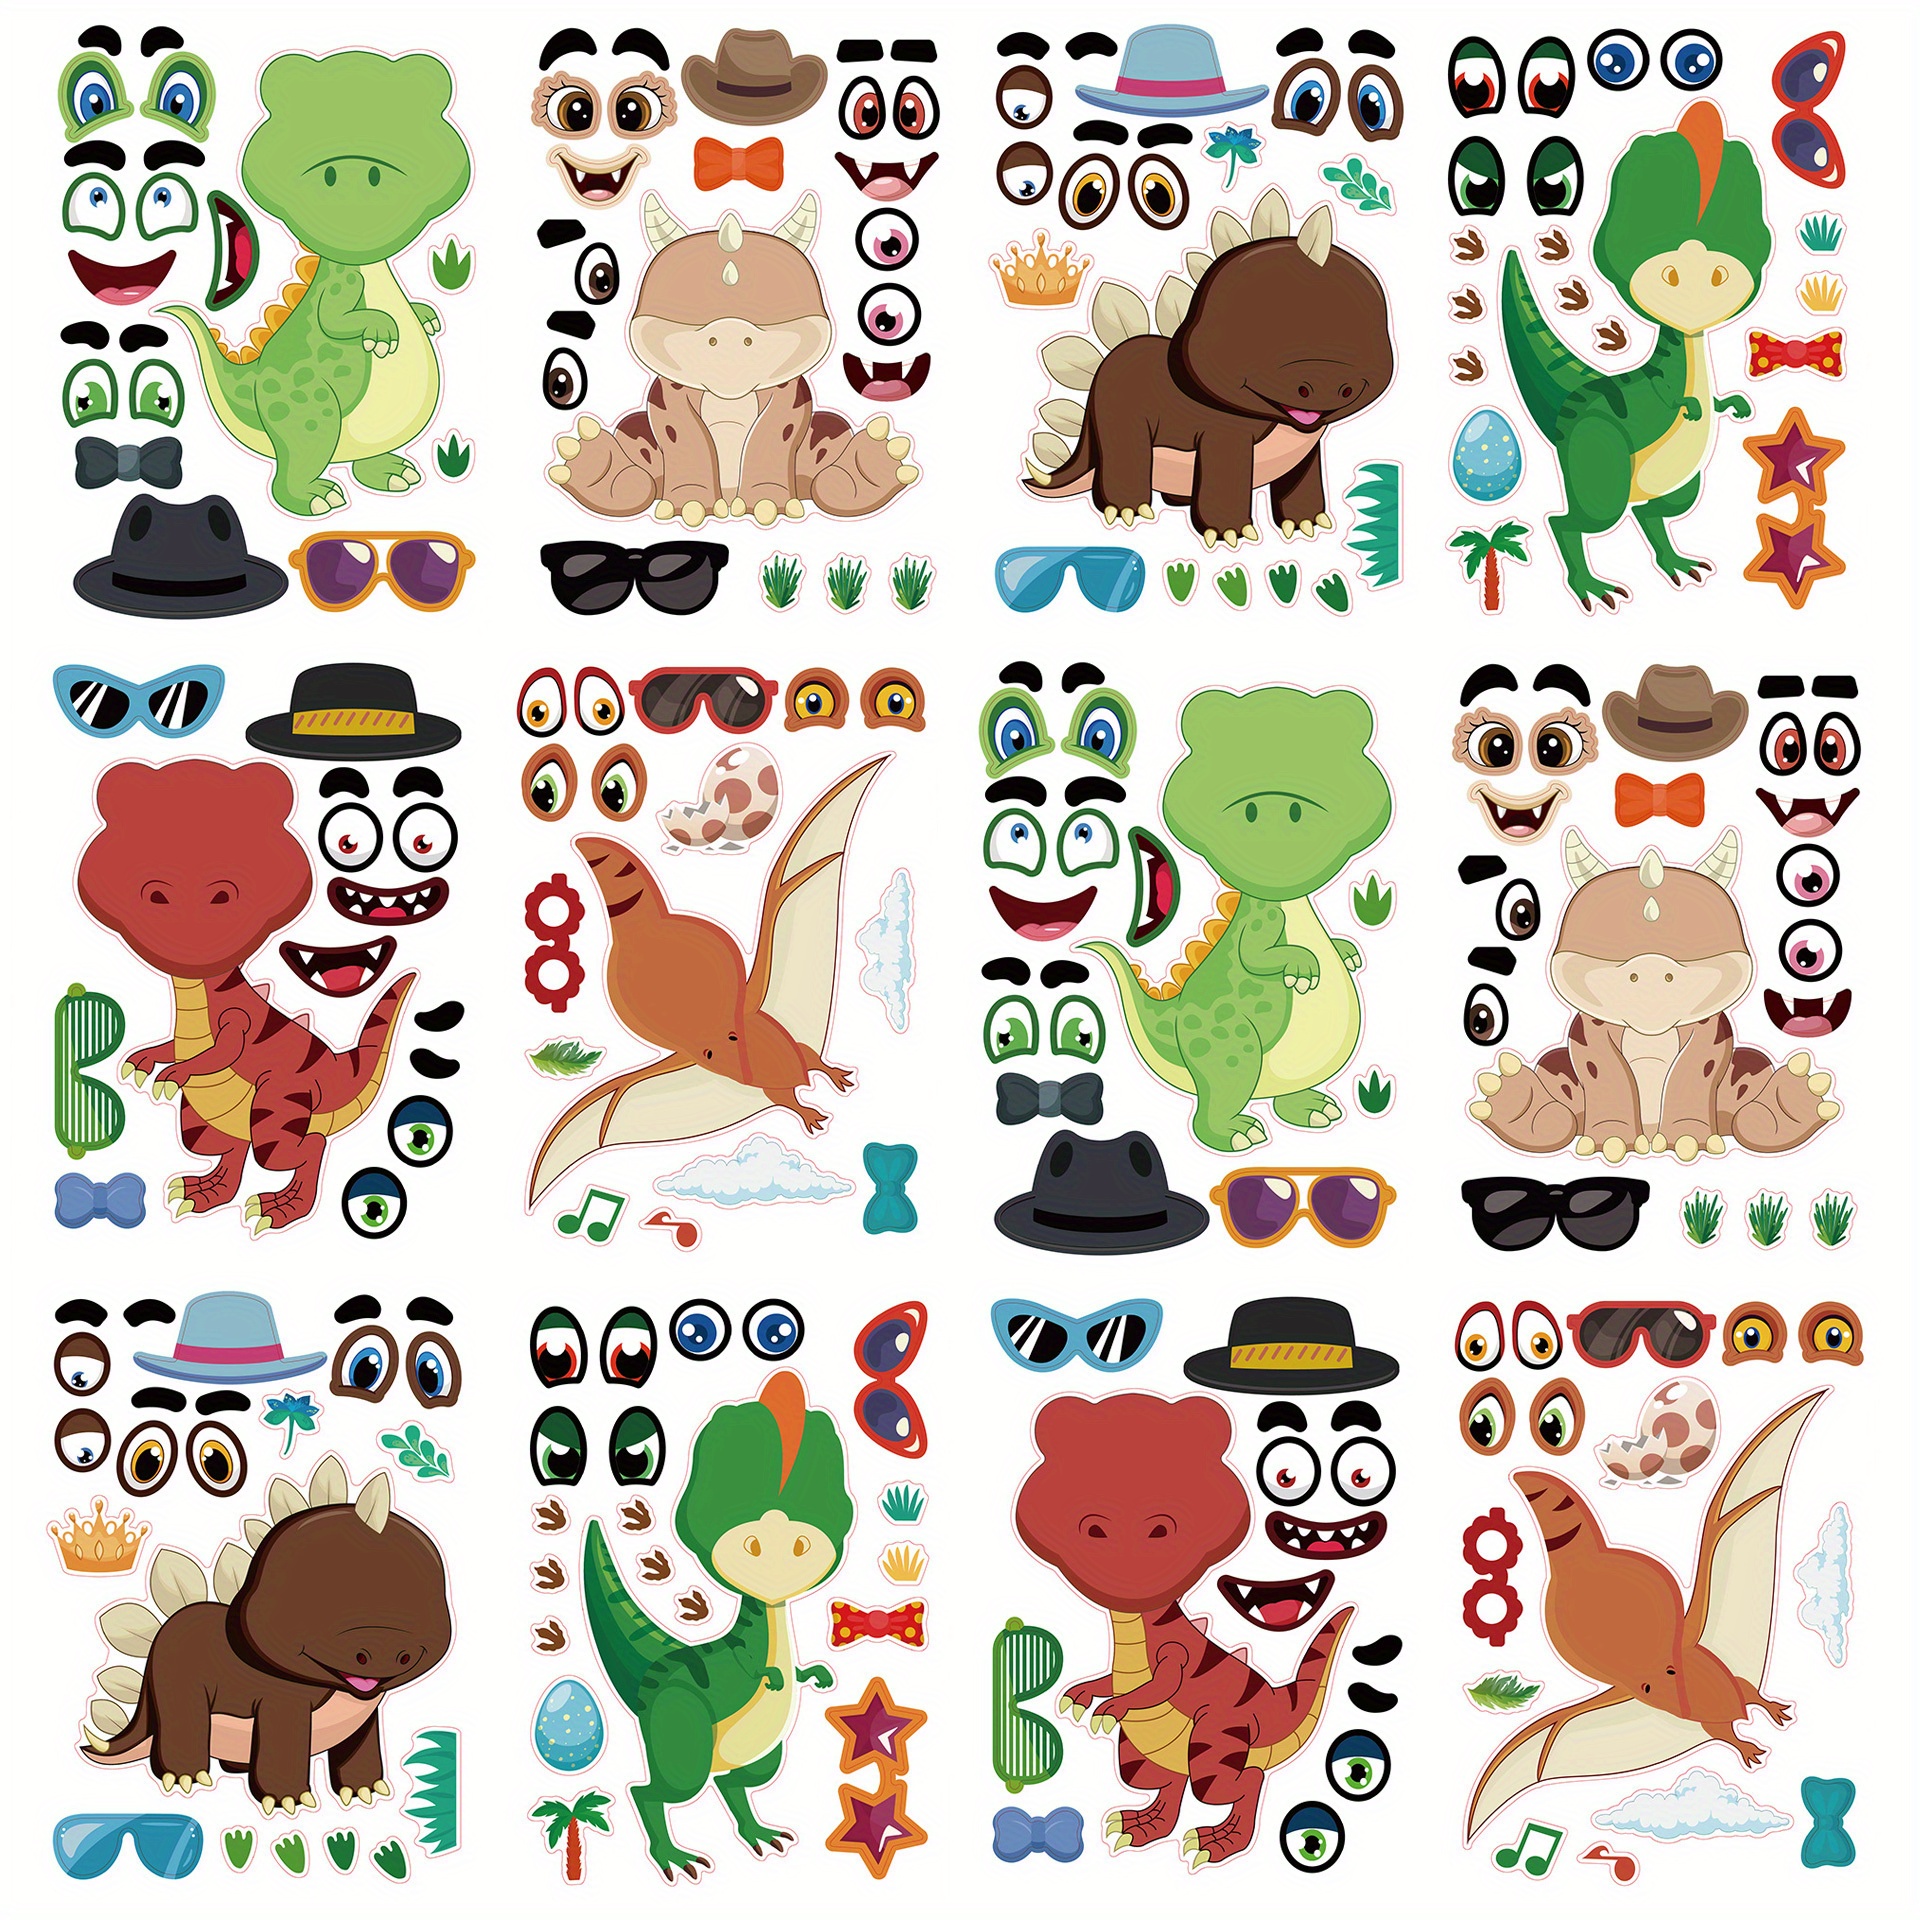 Beestech Stickers for Kids 2, 3, 4 Year Olds, Different Themes with Cars, Animals, Trucks, Dinosaur, Sticker Book for Kids 2-4 Included, Stickers for